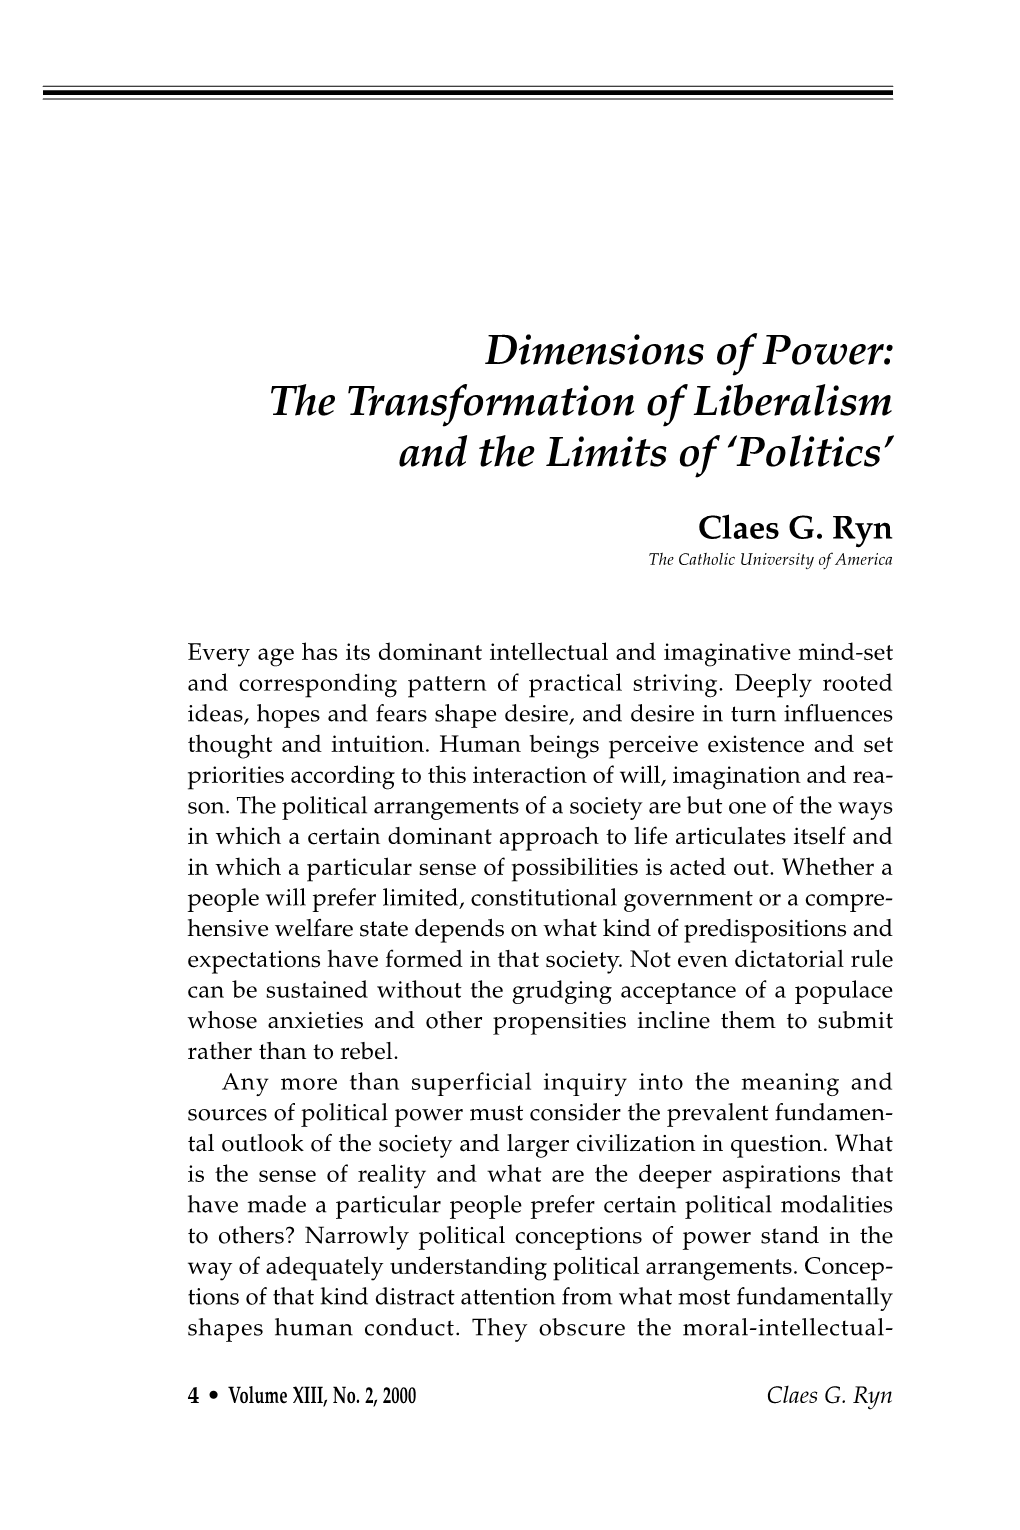 Dimensions of Power: the Transformation of Liberalism and the Limits of ‘Politics’